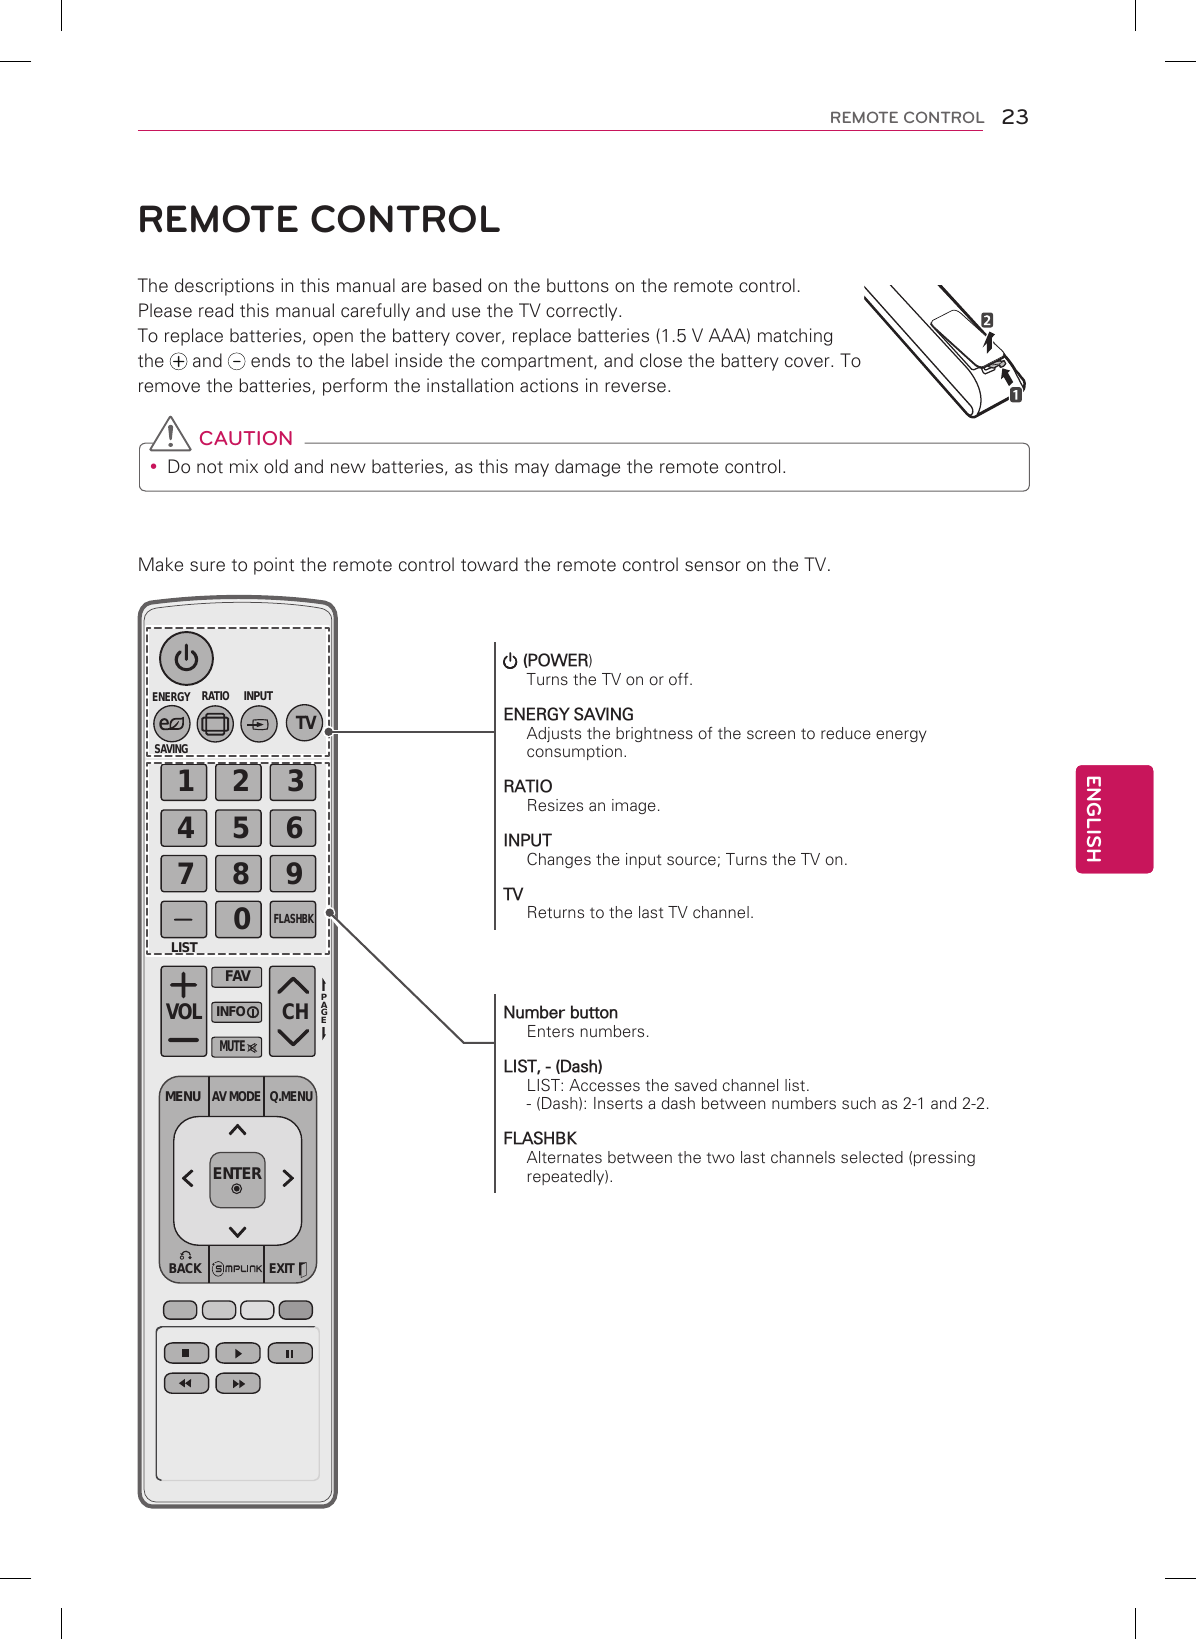 23ENGENGLISHREMOTE CONTROLREMOTE CONTROLThe descriptions in this manual are based on the buttons on the remote control. Please read this manual carefully and use the TV correctly.To replace batteries, open the battery cover, replace batteries (1.5 V AAA) matching the   and   ends to the label inside the compartment, and close the battery cover. To remove the batteries, perform the installation actions in reverse. CAUTION Do not mix old and new batteries, as this may damage the remote control.Make sure to point the remote control toward the remote control sensor on the TV. (POWER)Turns the TV on or off.ENERGY SAVINGAdjusts the brightness of the screen to reduce energy consumption.RATIOResizes an image.INPUTChanges the input source; Turns the TV on.TVReturns to the last TV channel.Number buttonEnters numbers.LIST, - (Dash) LIST: Accesses the saved channel list.- (Dash): Inserts a dash between numbers such as 2-1 and 2-2.FLASHBKAlternates between the two last channels selected (pressing repeatedly).ENERGYCHVOL1 2 34 5 67 809PAGESAVINGTVRATIOINPUTFAVMUTELISTFLASHBKBACK EXITENTERQ.MENUMENUINFOAV MODE